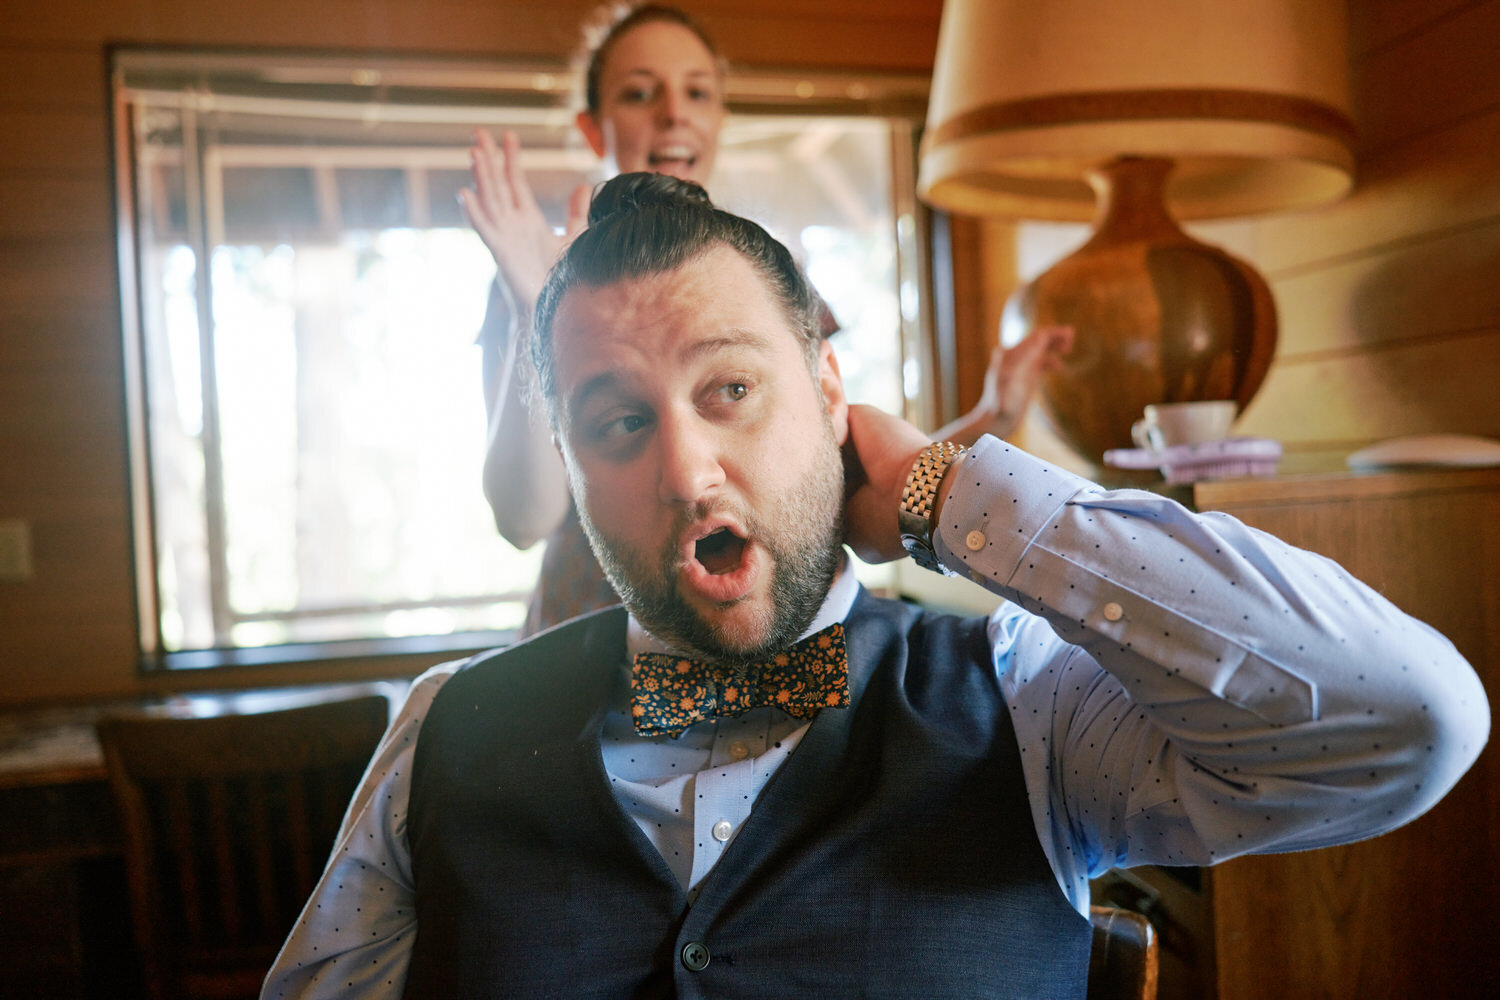 Groom makes an astonished face as he gets ready for the wedding